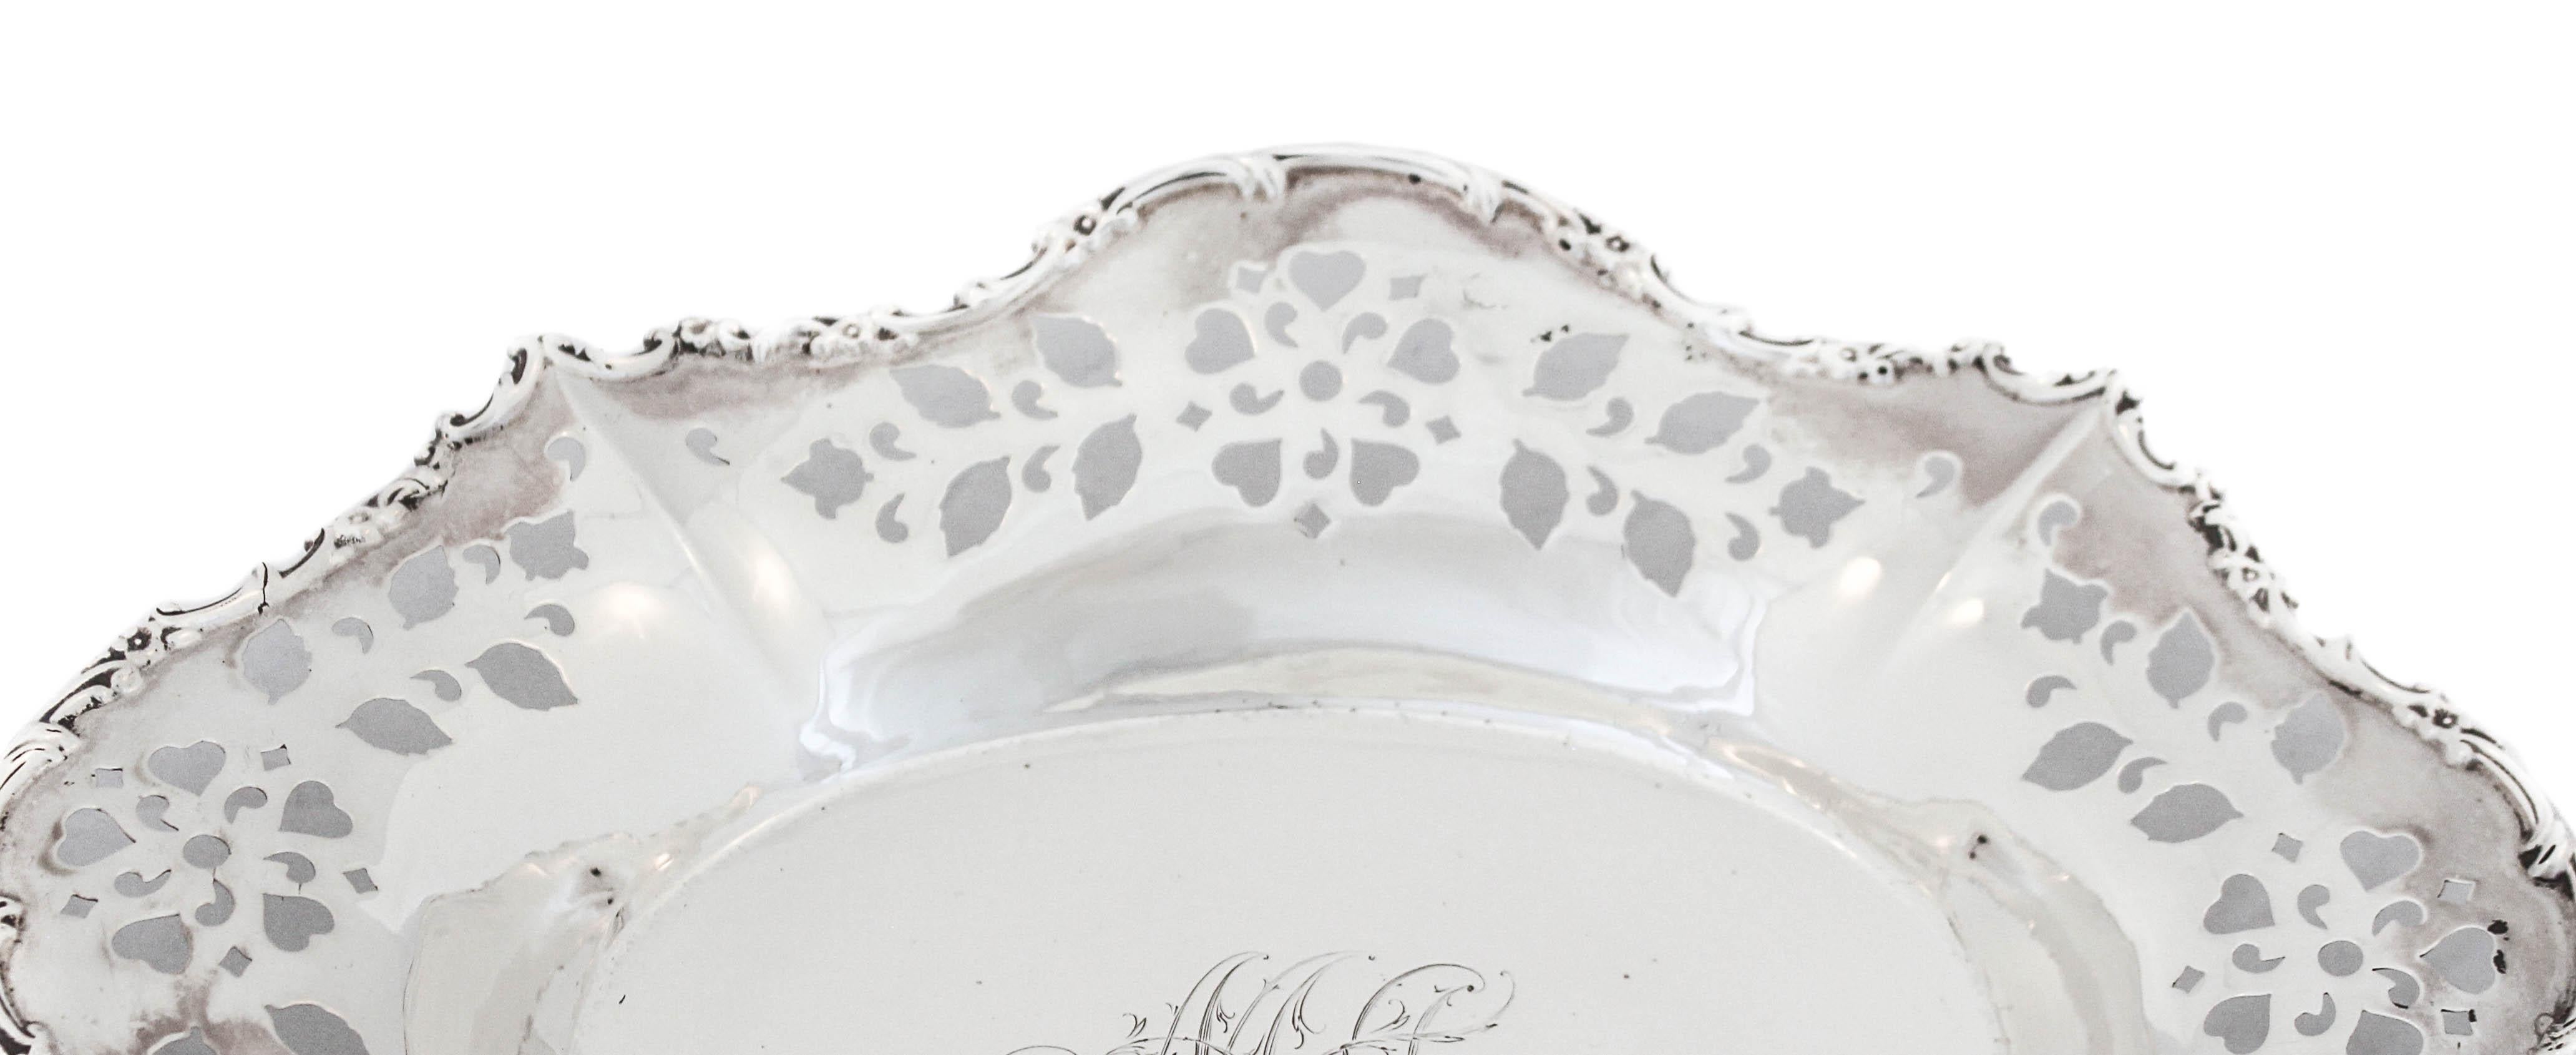 Being offered is a sterling silver oval dish by Wilcox and Evertsen of New York. The edge is scalloped with a decorative rim and along the sides there is a reticulated pattern of hearts and leaves. In the center there is a hand engraved script